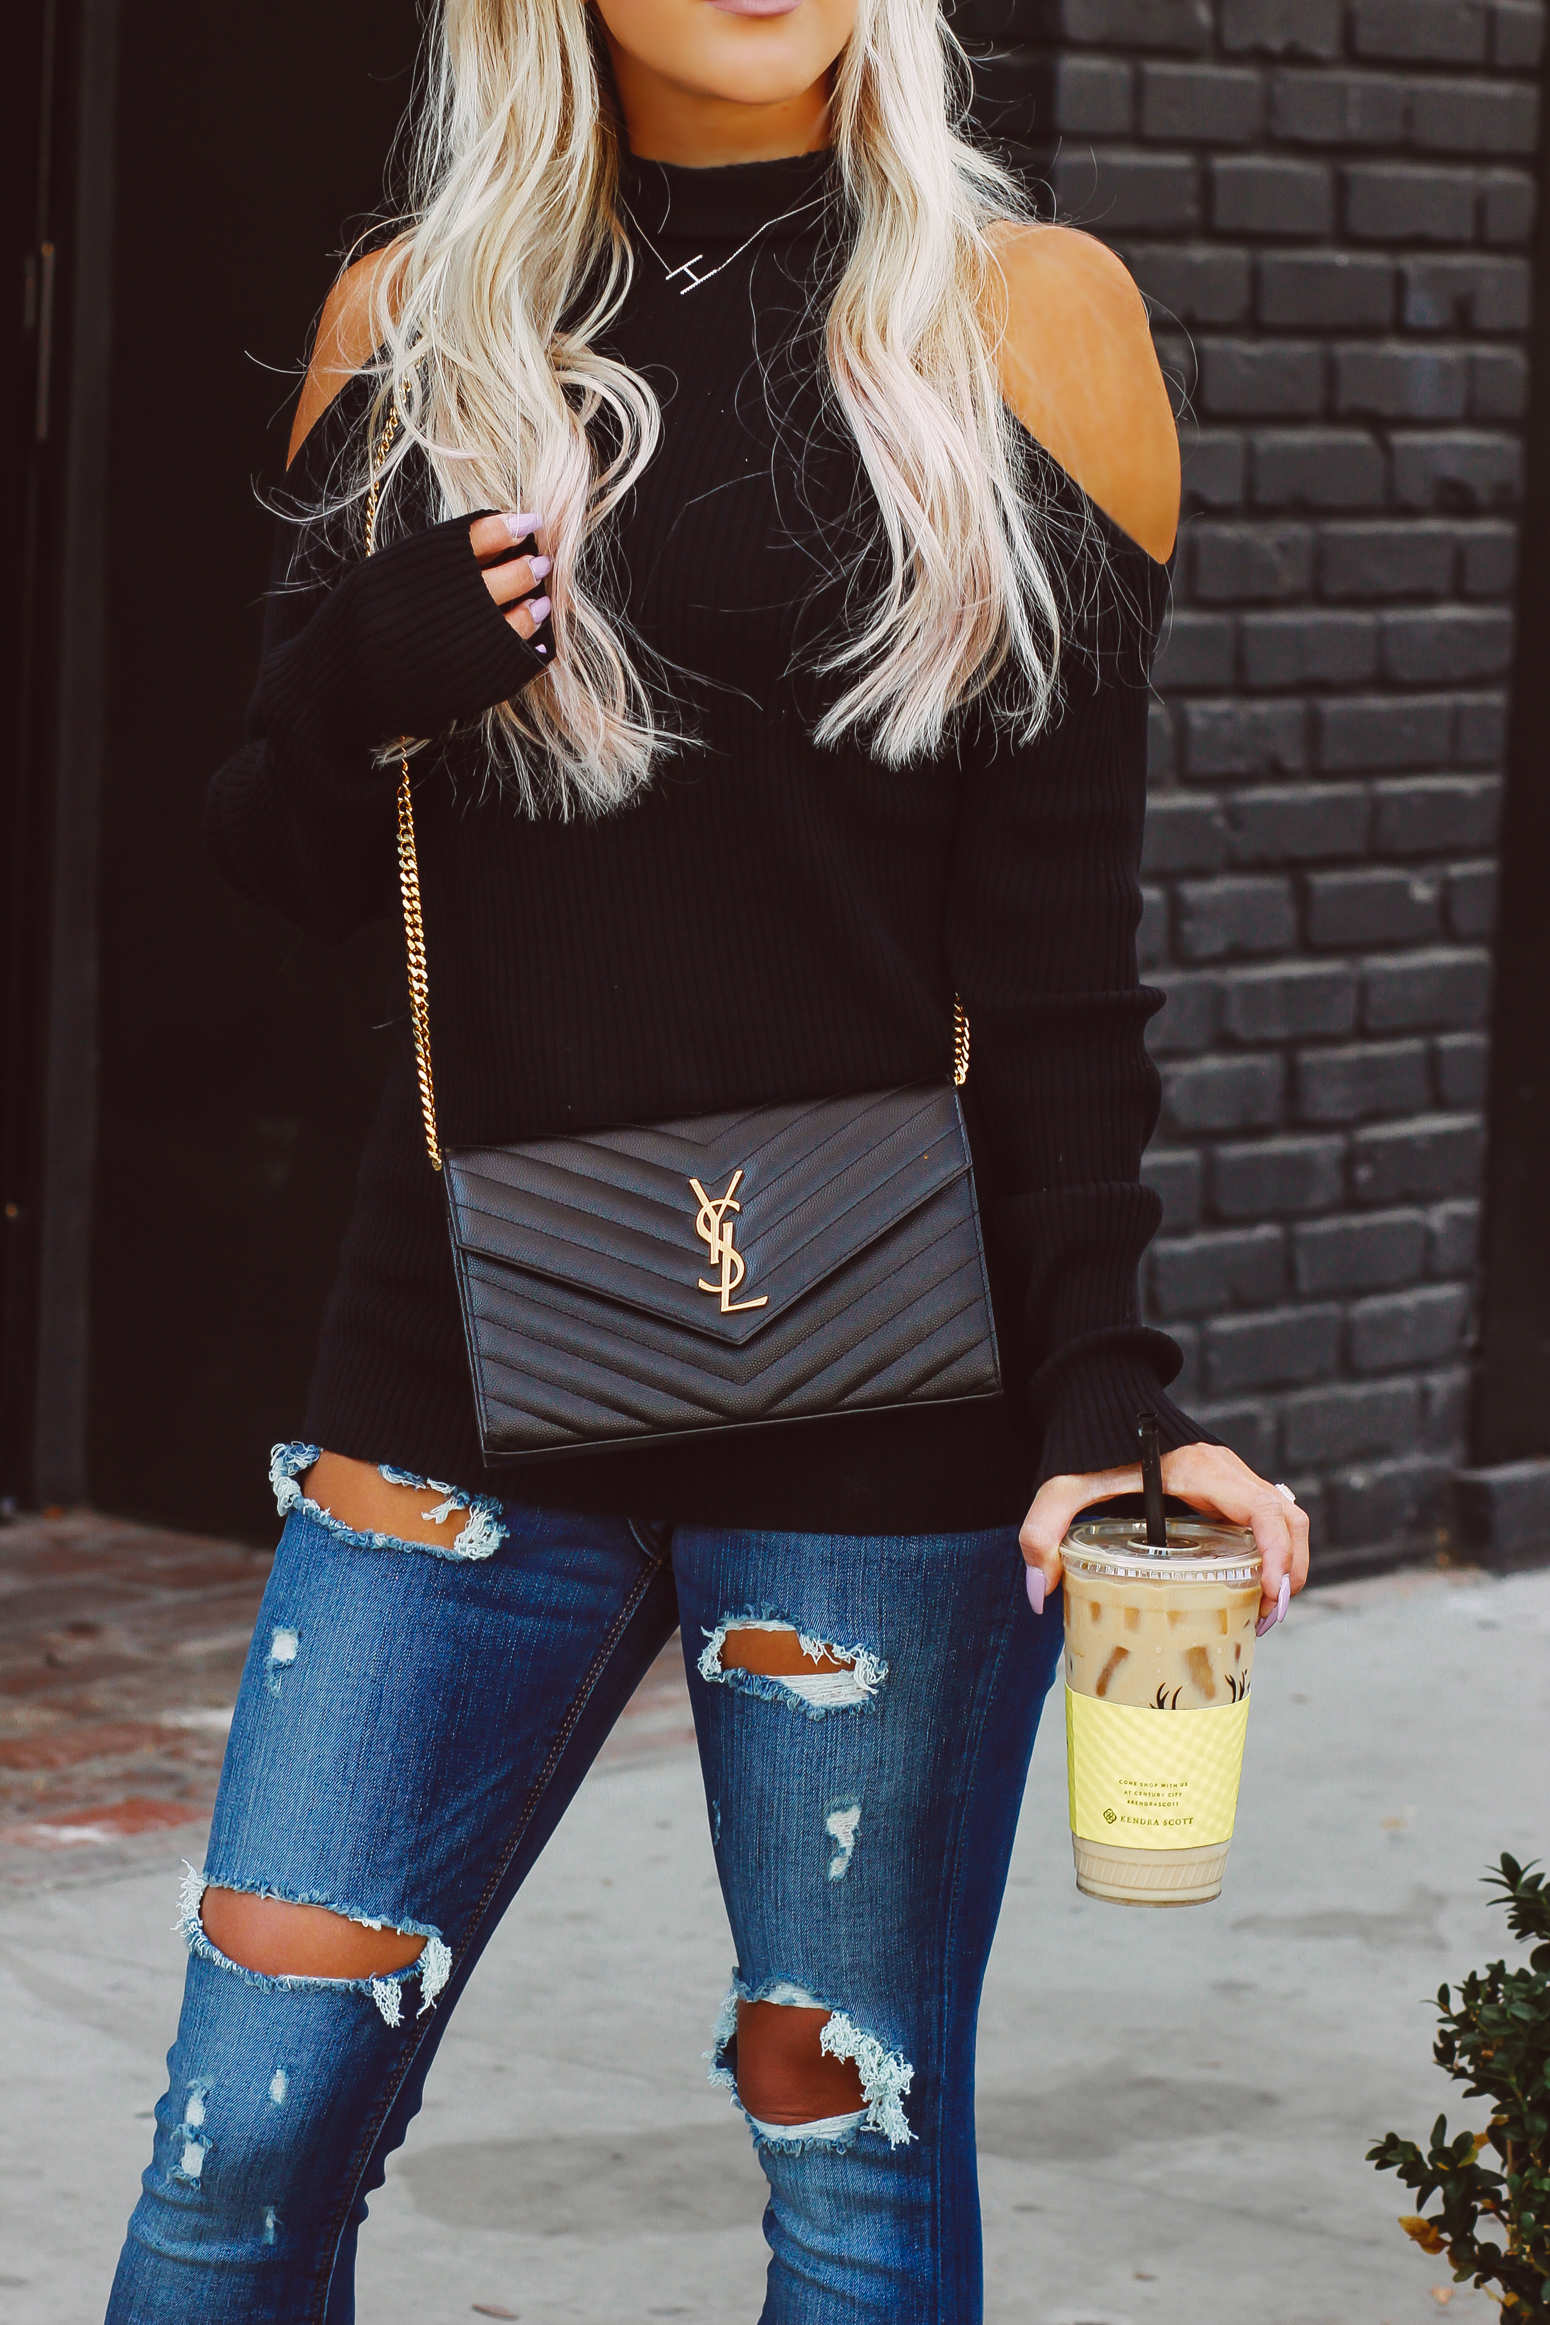 Blondie in the City | Fall Fashion Inspo | YSL | Sweater Weather